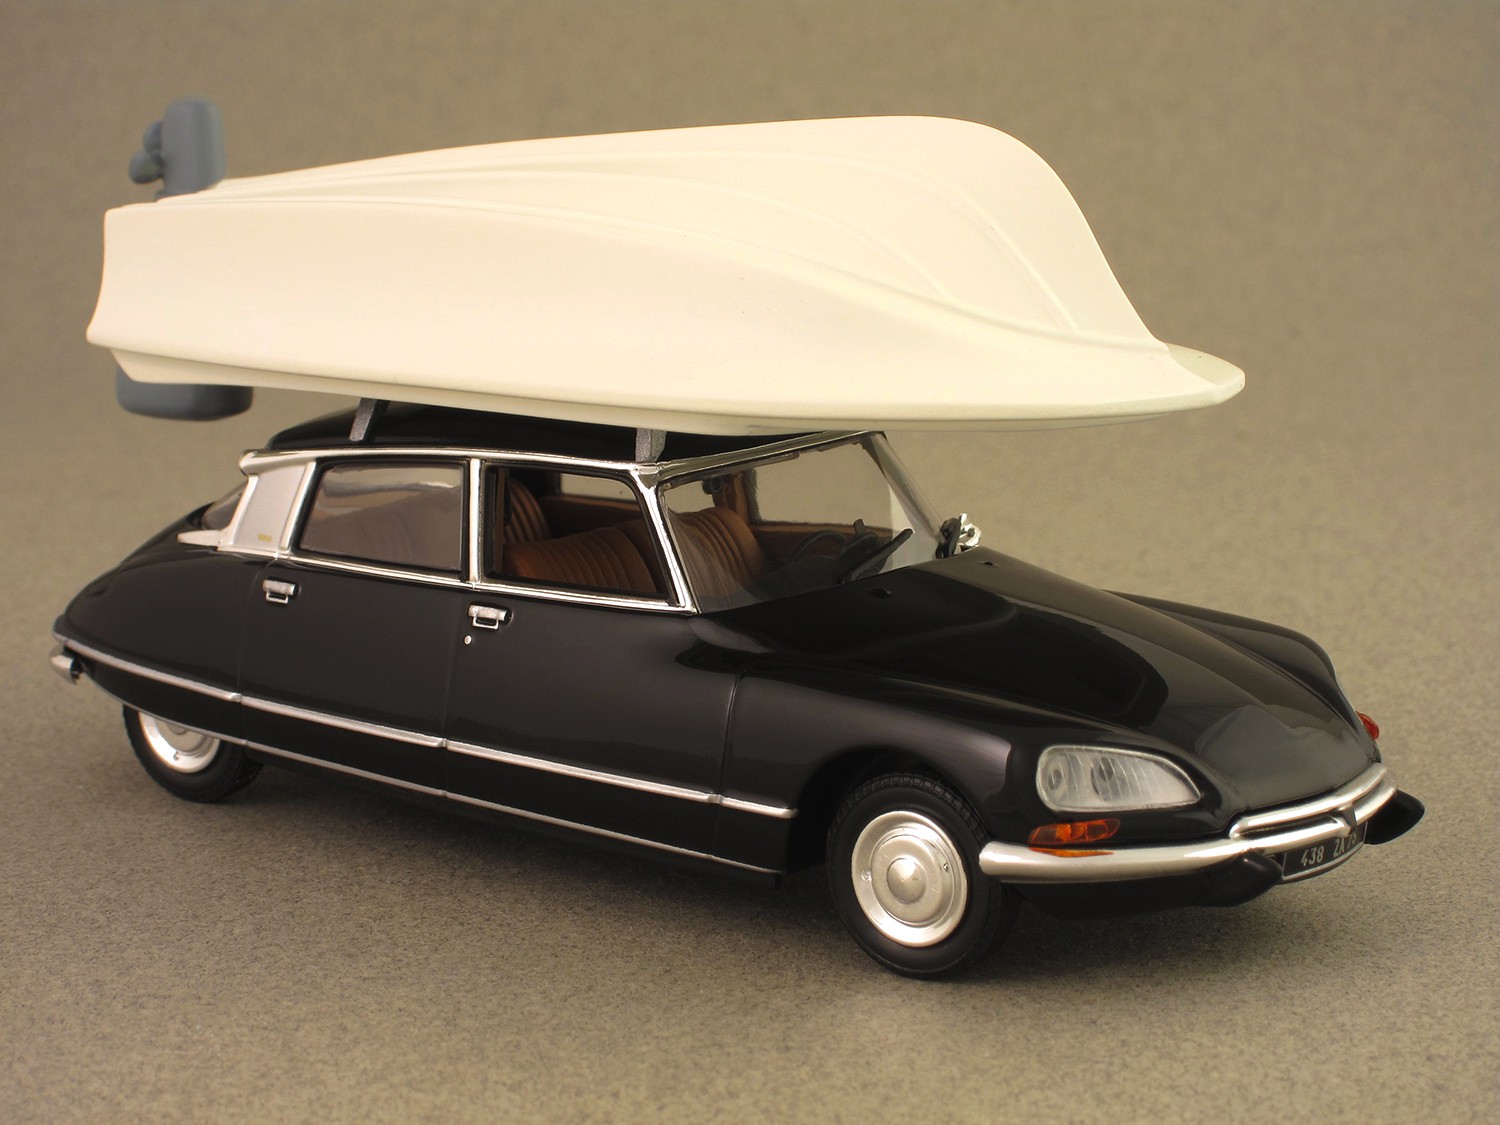 Citroën DS 21 Pallas with boat on the roof (Norev) 1:43